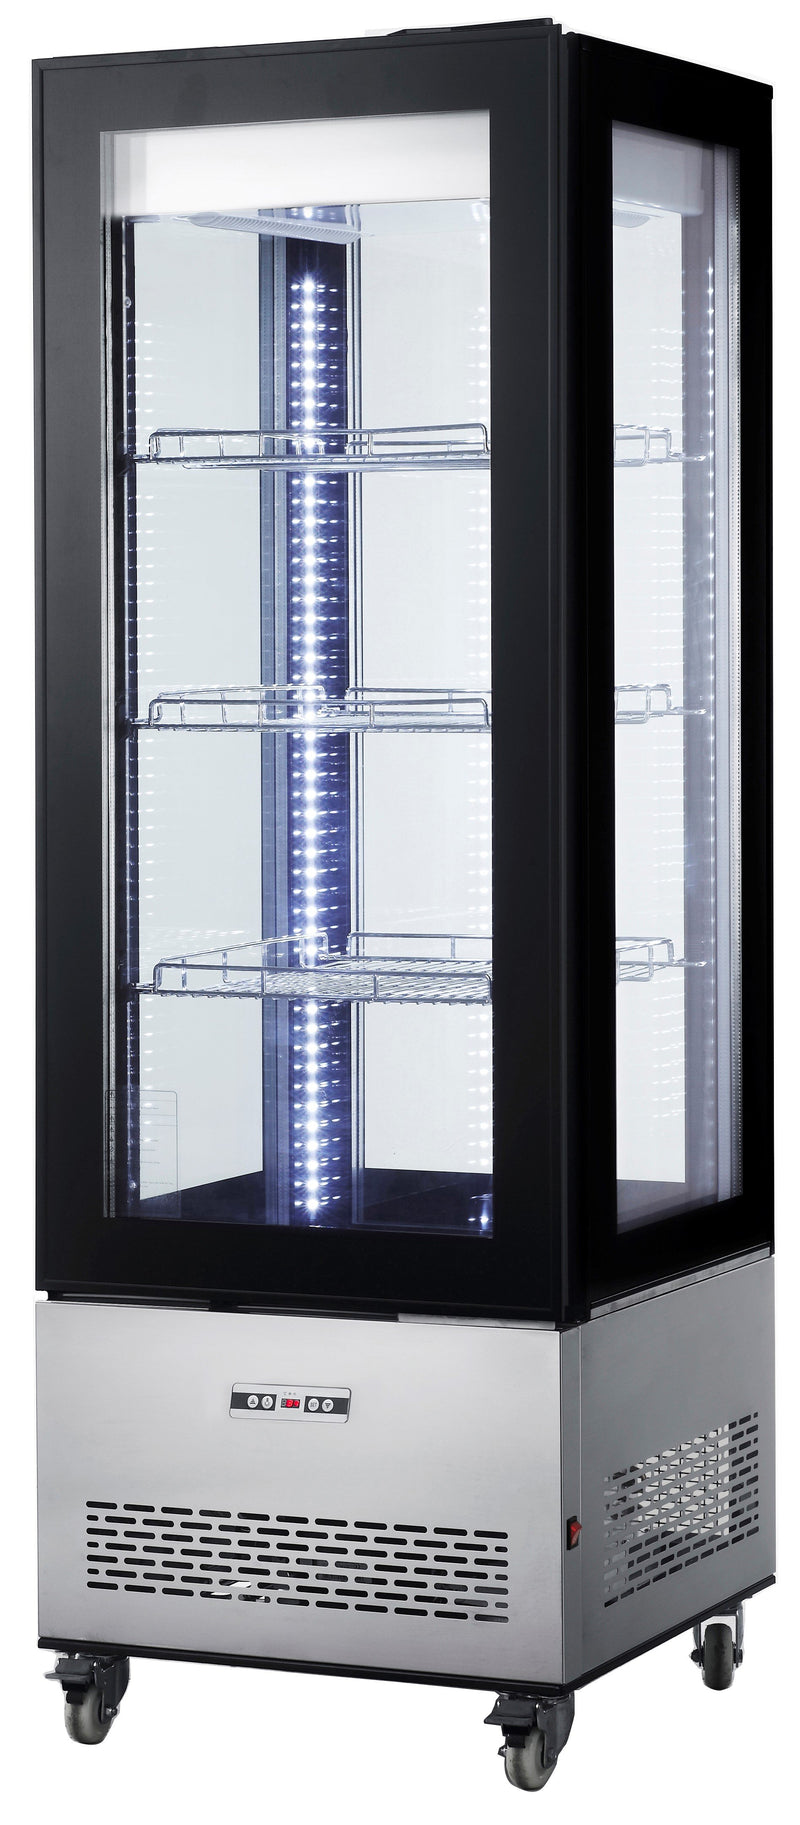 4-Sided Glass Refrigerated Display Case (33.5" x 25.6" x 75")